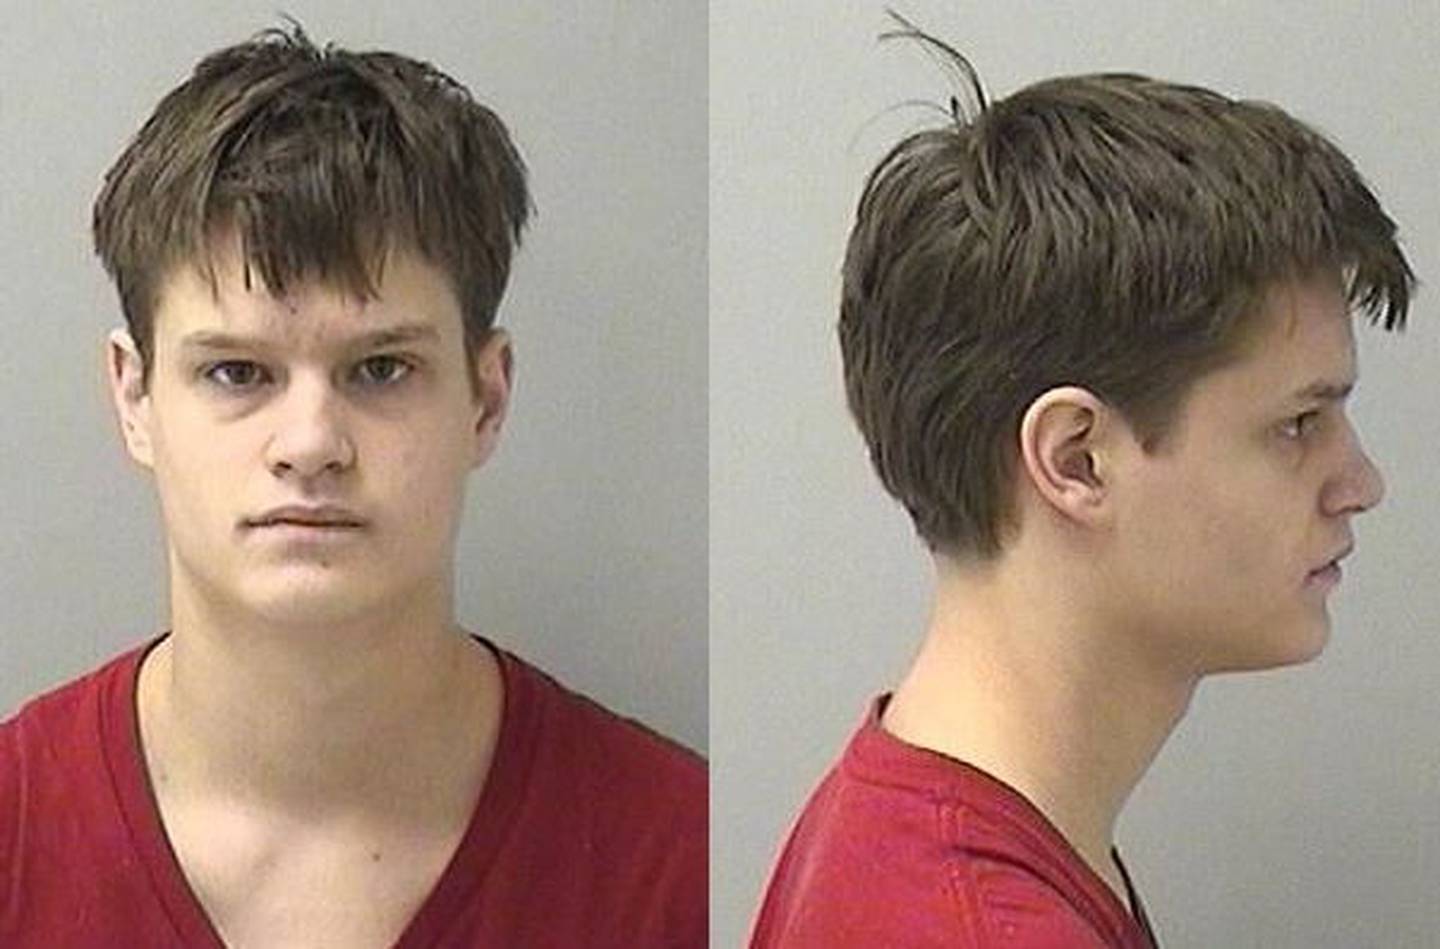 Tyler A. Schmidt was charged felony aggravated driving under the influence; felony reckless homicide; felony aggravated driving under the influence of drugs causing great bodily harm; felony aggravated reckless driving; lesser offenses of failing to reduce his speed to avoid a crash, speeding over the posted limit and failure to stop before reaching a school bus.